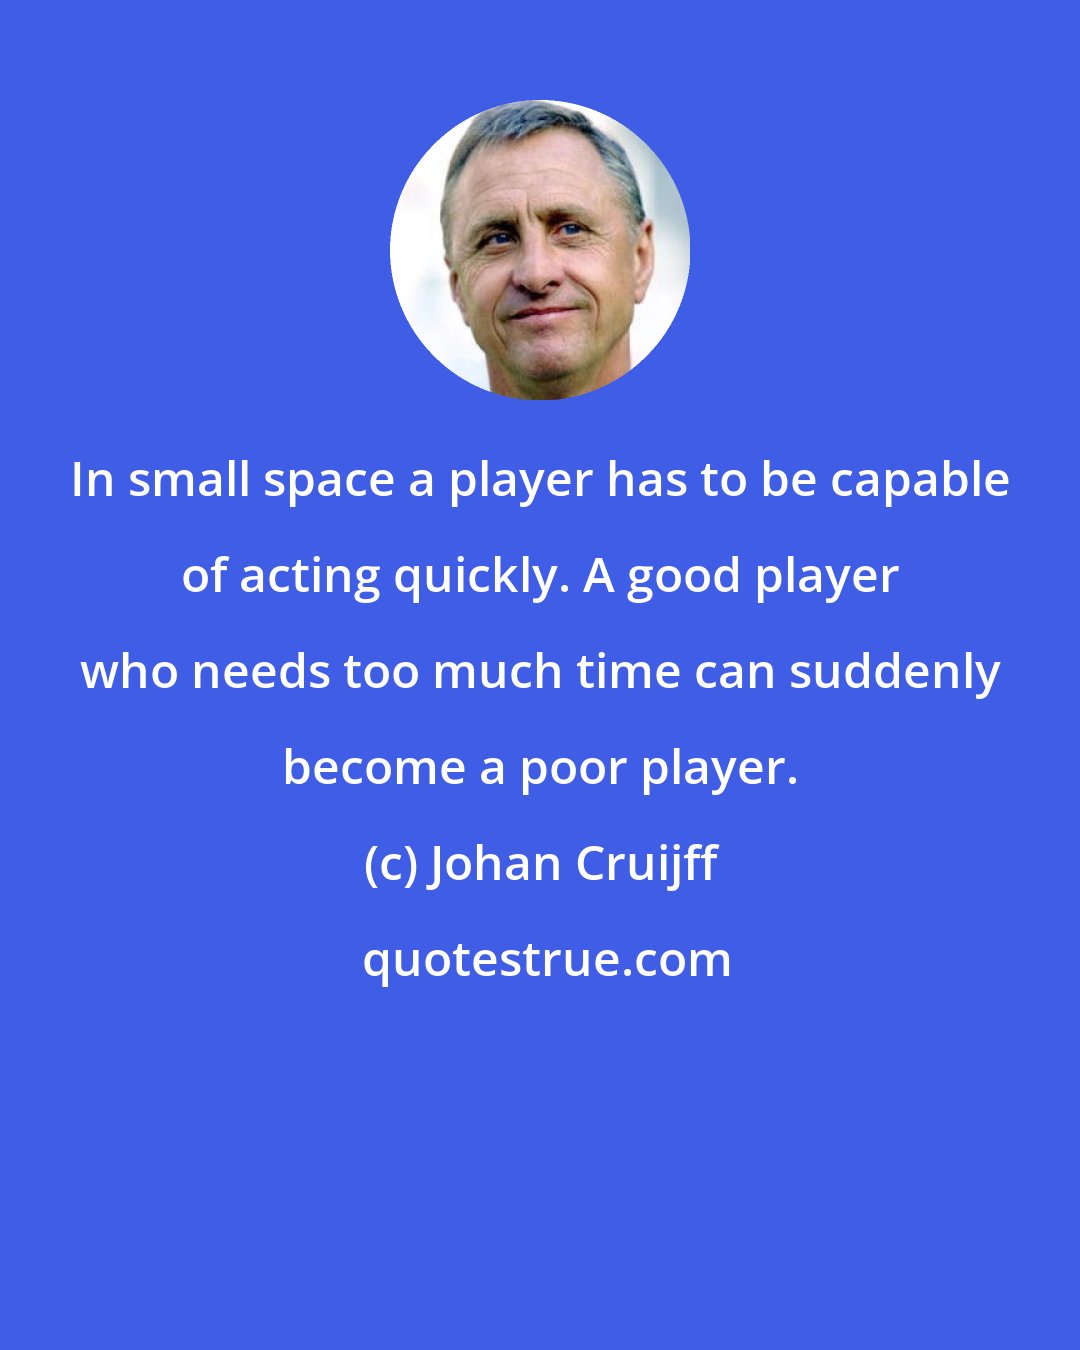 Johan Cruijff: In small space a player has to be capable of acting quickly. A good player who needs too much time can suddenly become a poor player.